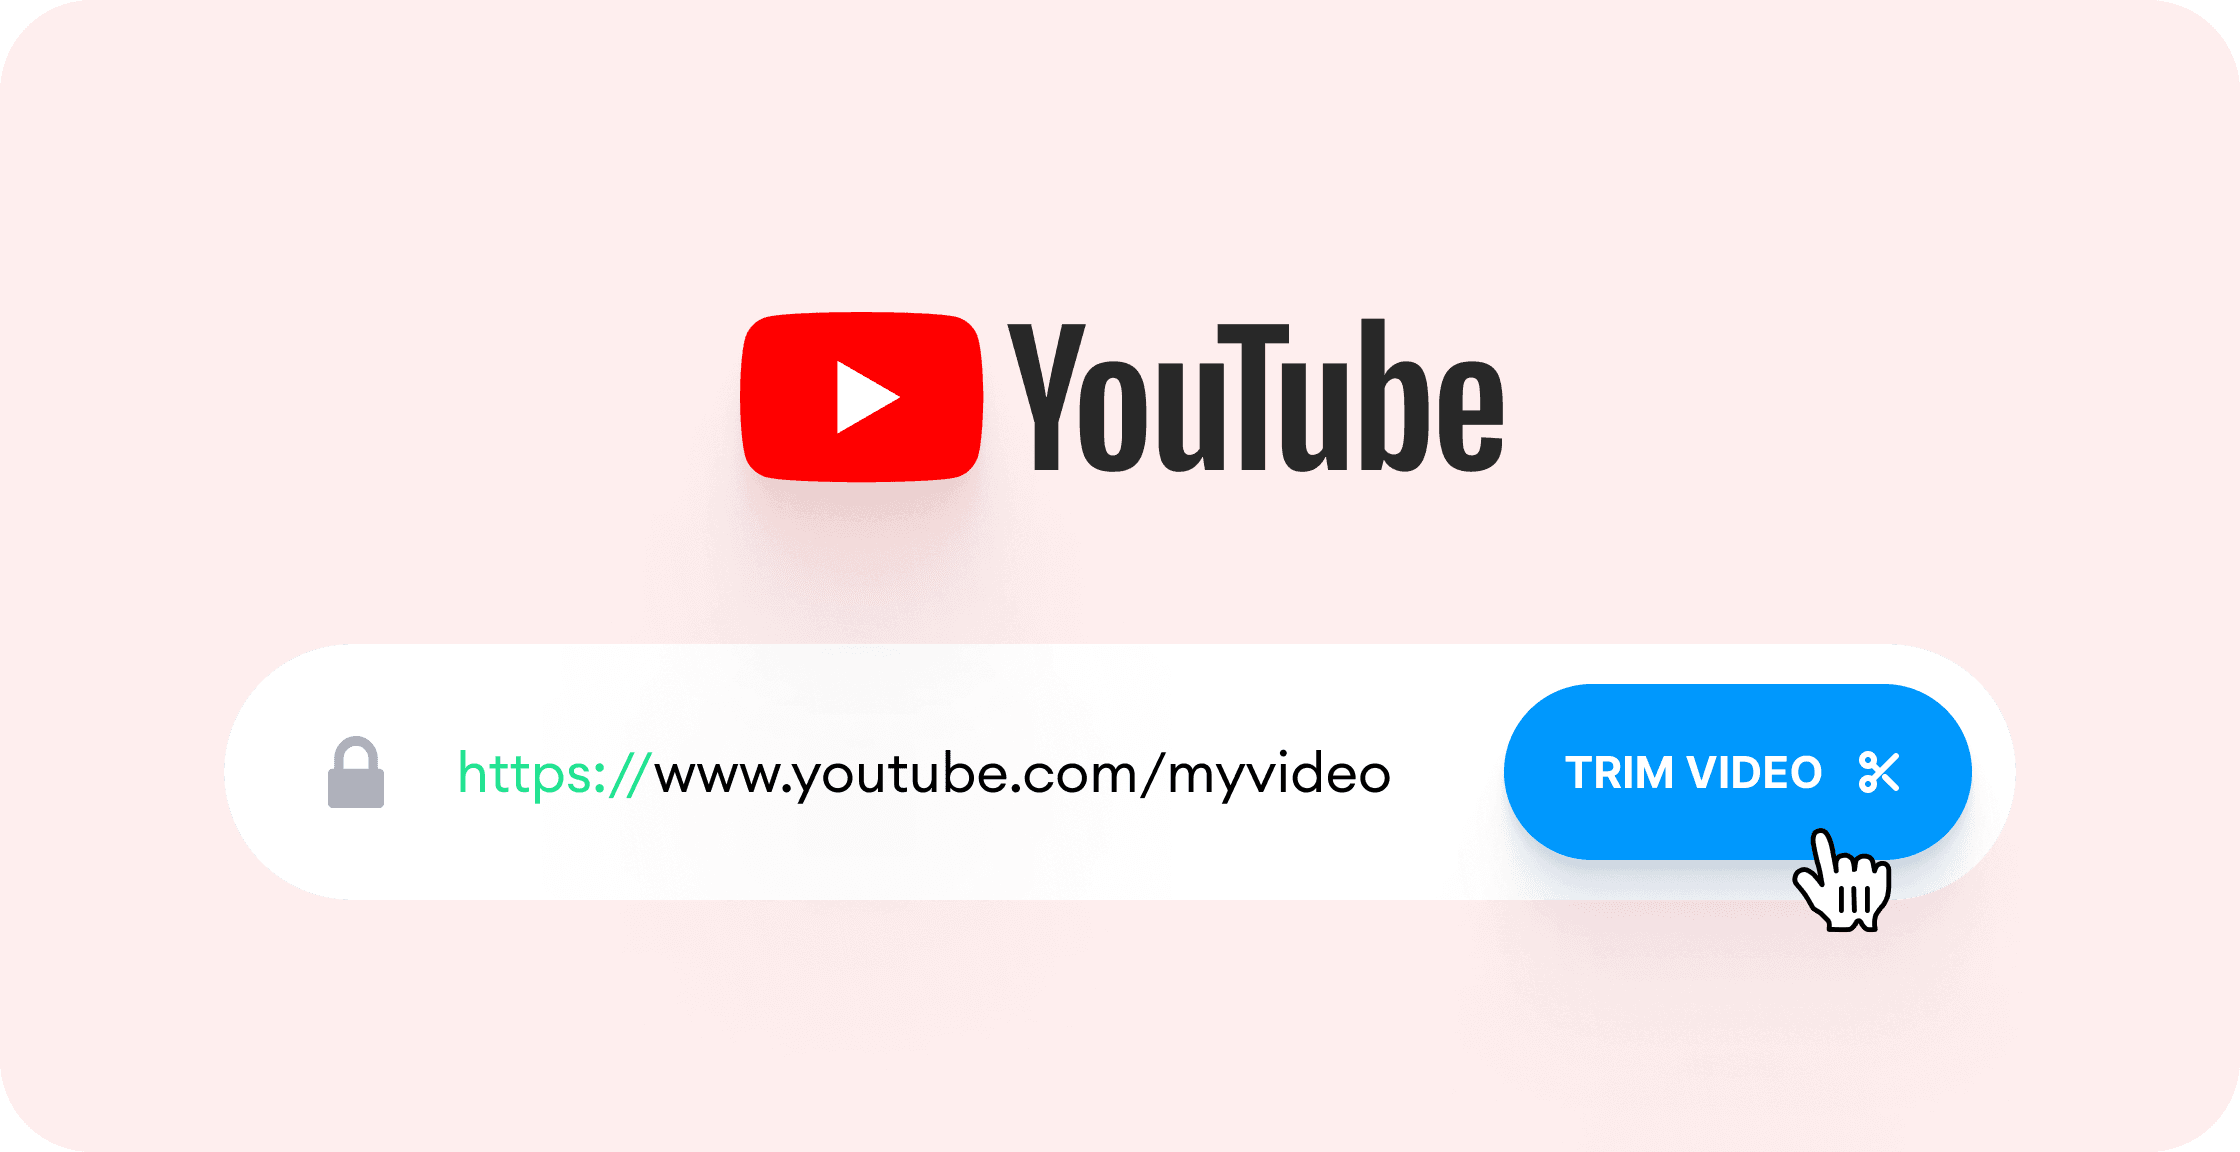 Cut YouTube videos straight from the URL